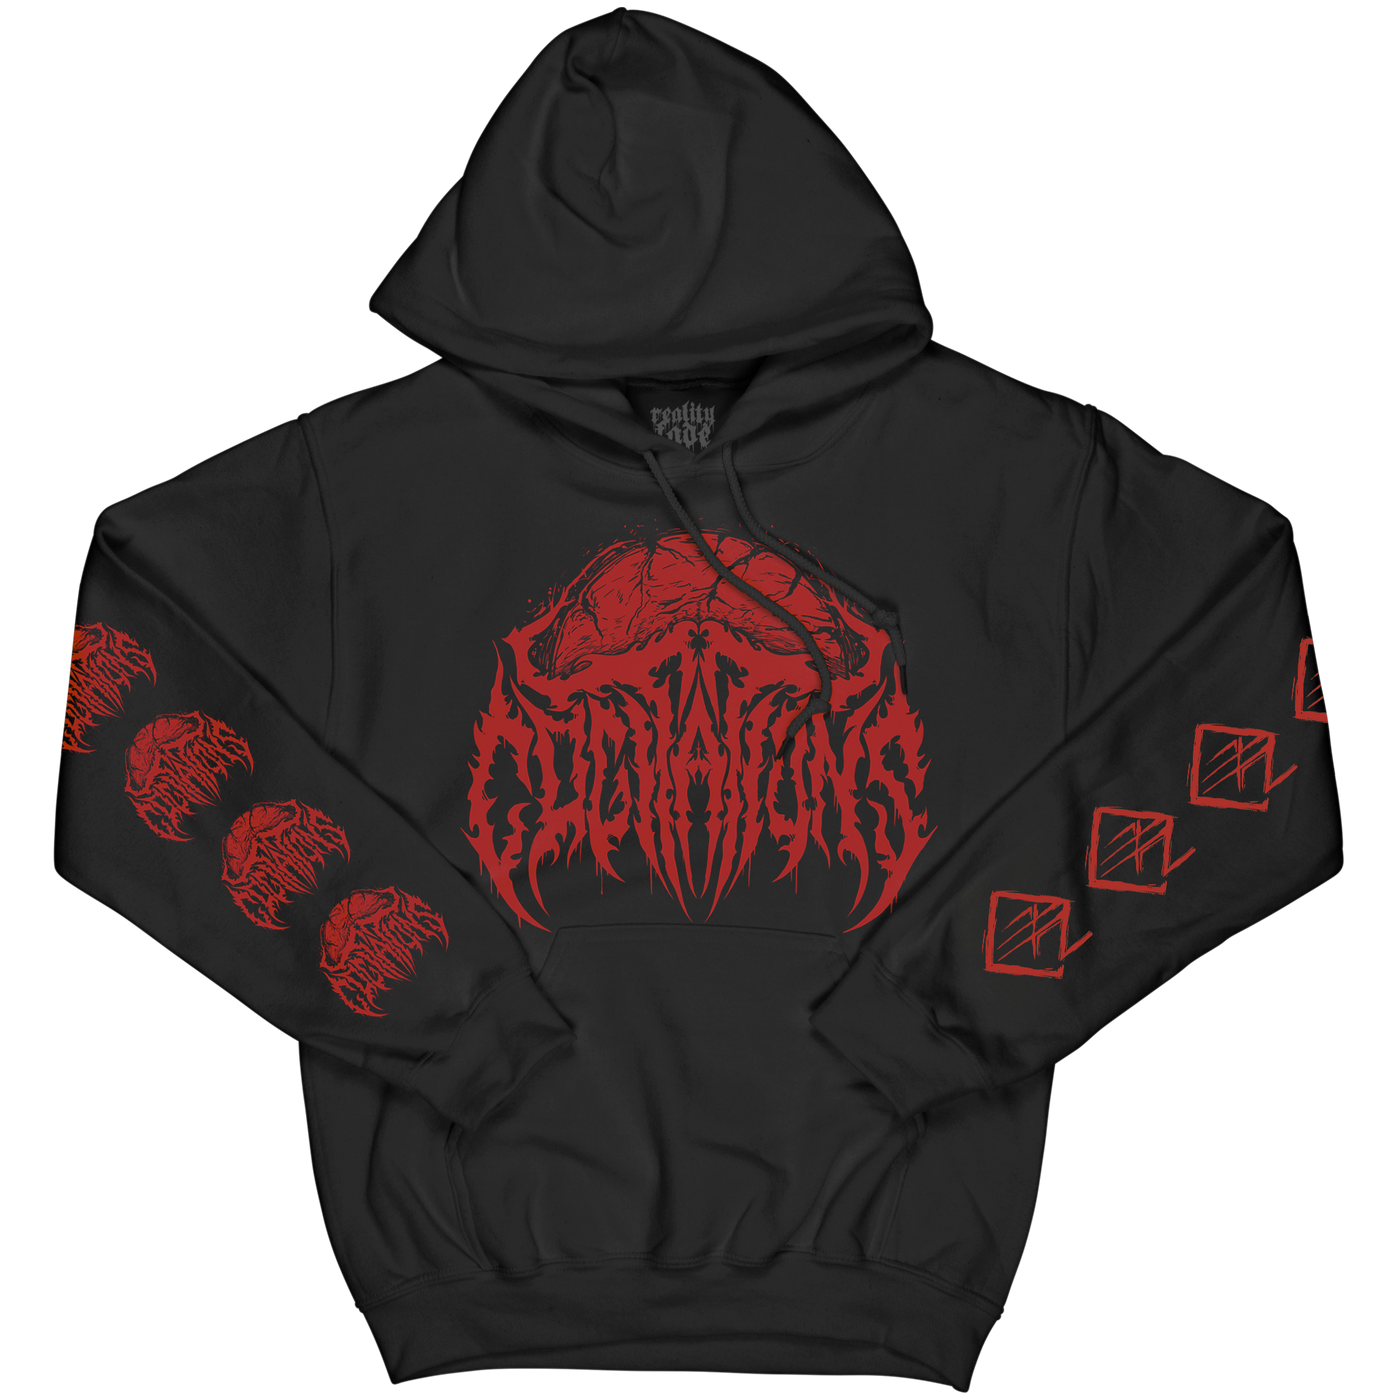 Cogitations 'Relinquished' Hoodie